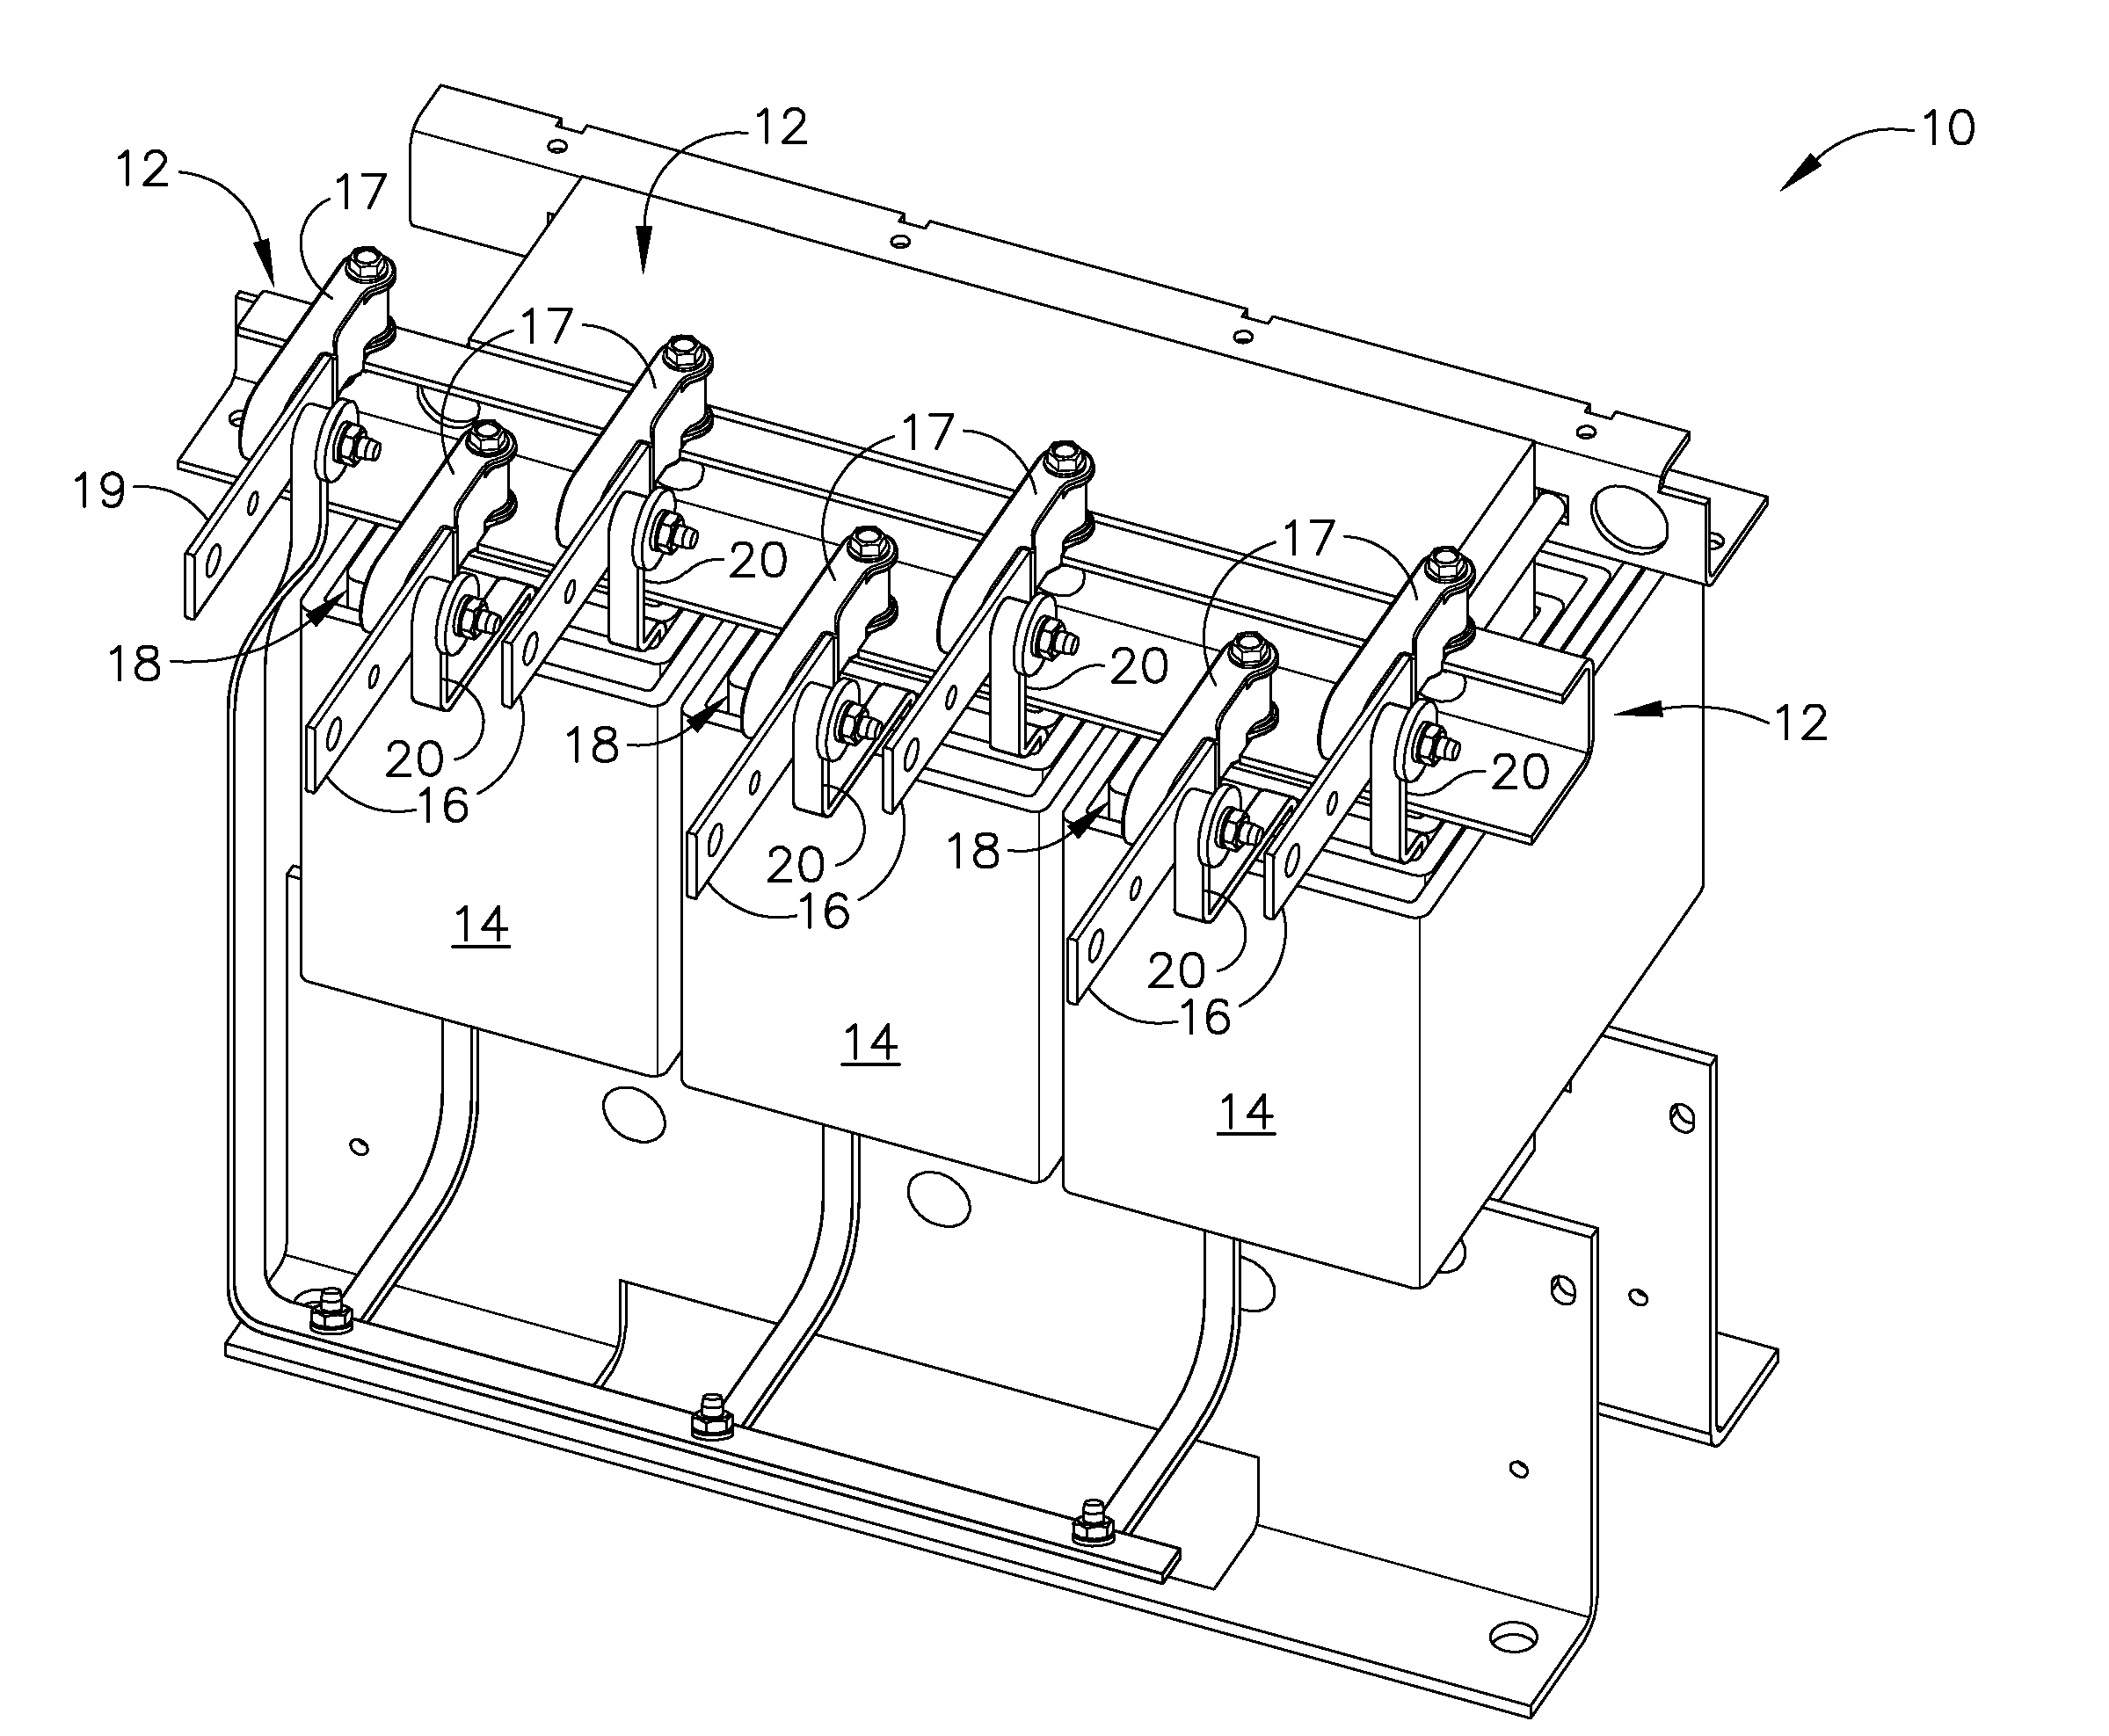 Transformer and method of assembly